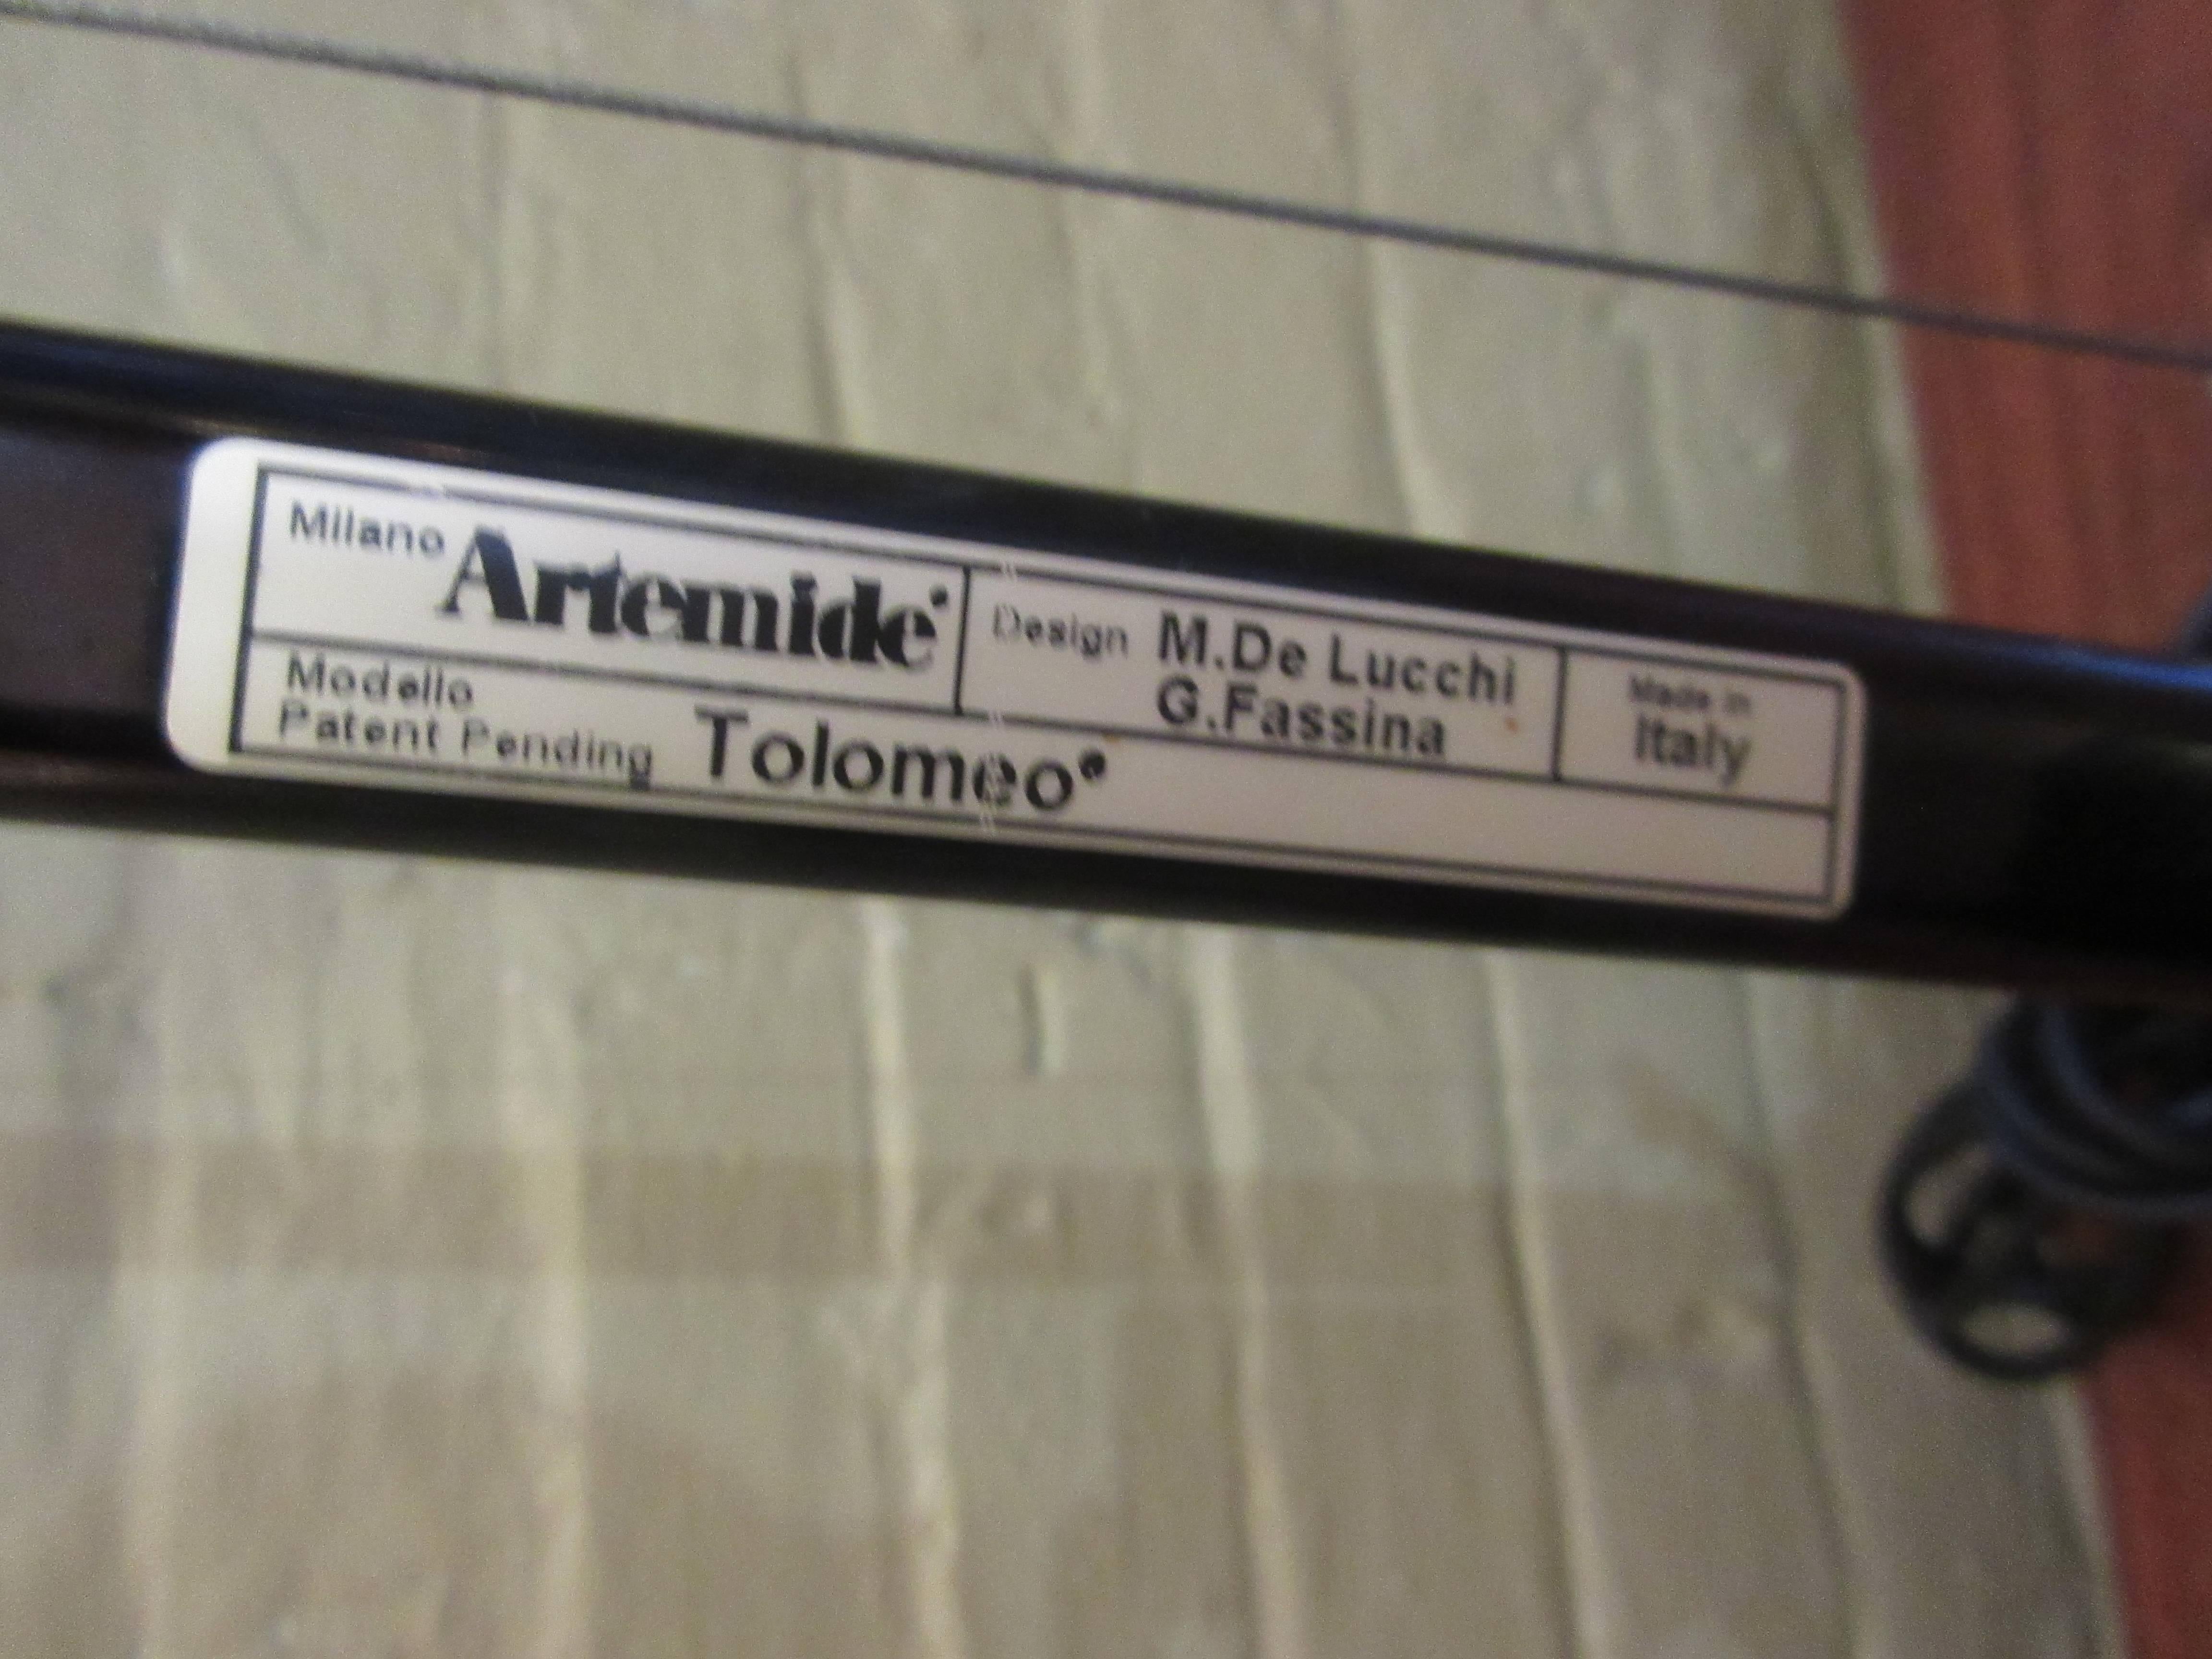 Infinitely adjustable desk lamps by Artemide all with labels in black paint. New old stock never used.